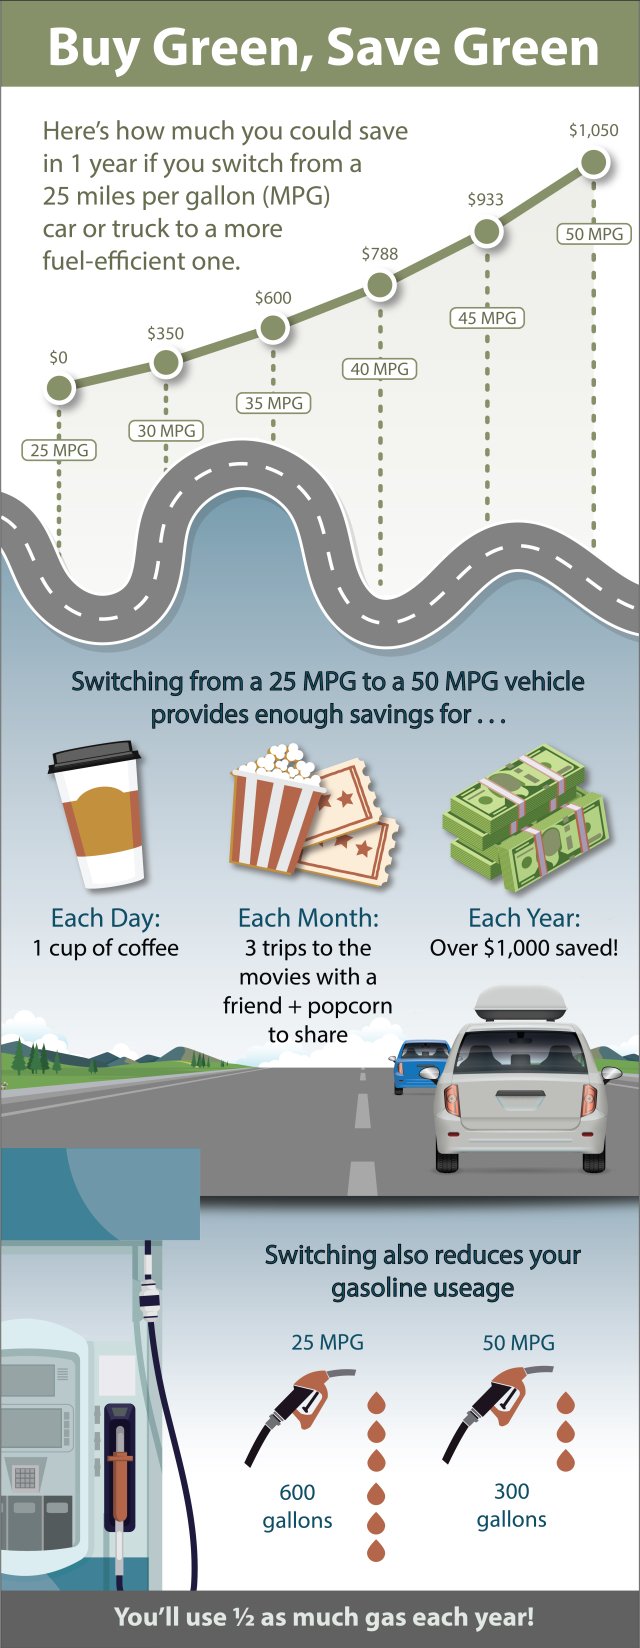 graph showing how much you can save in a year by switching from a 25 MPG vehicle to a more fuel-efficient one.